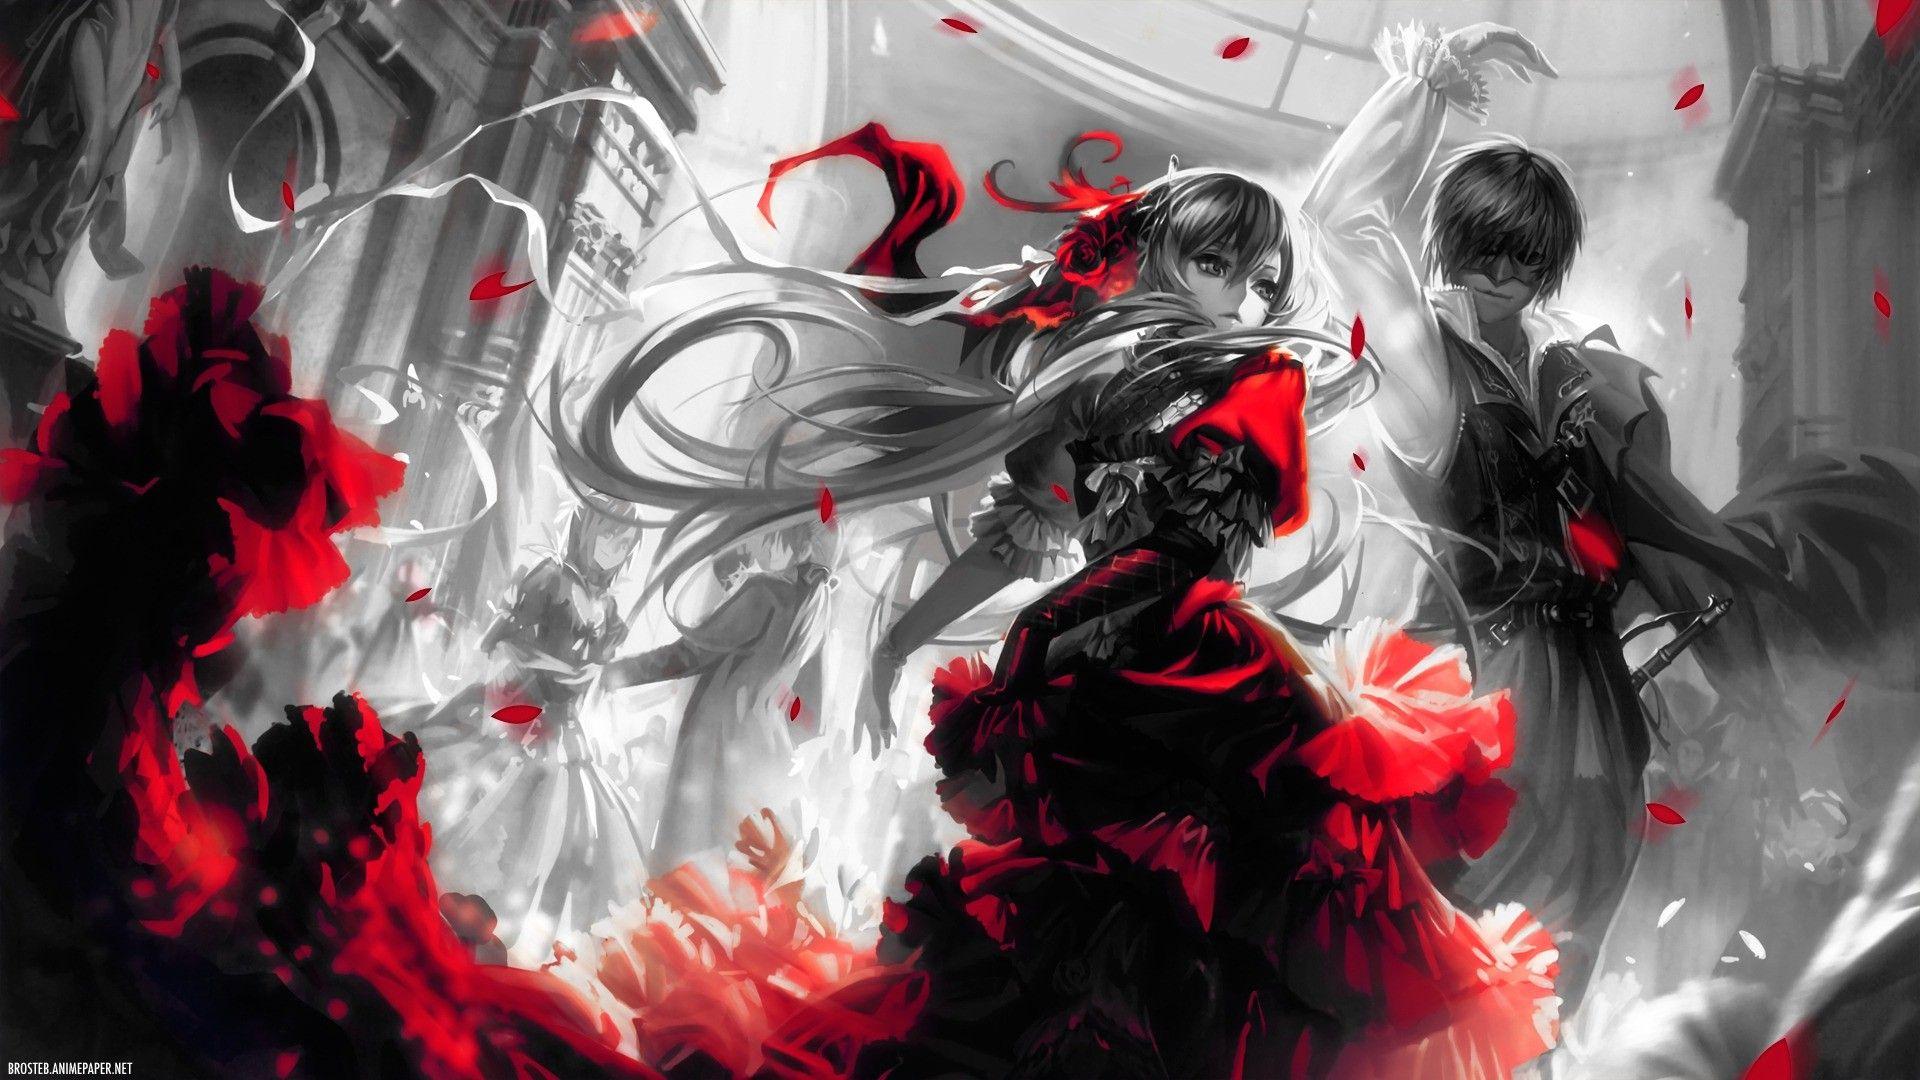 Red Anime Wallpapers - Top Free Red Anime Backgrounds ...